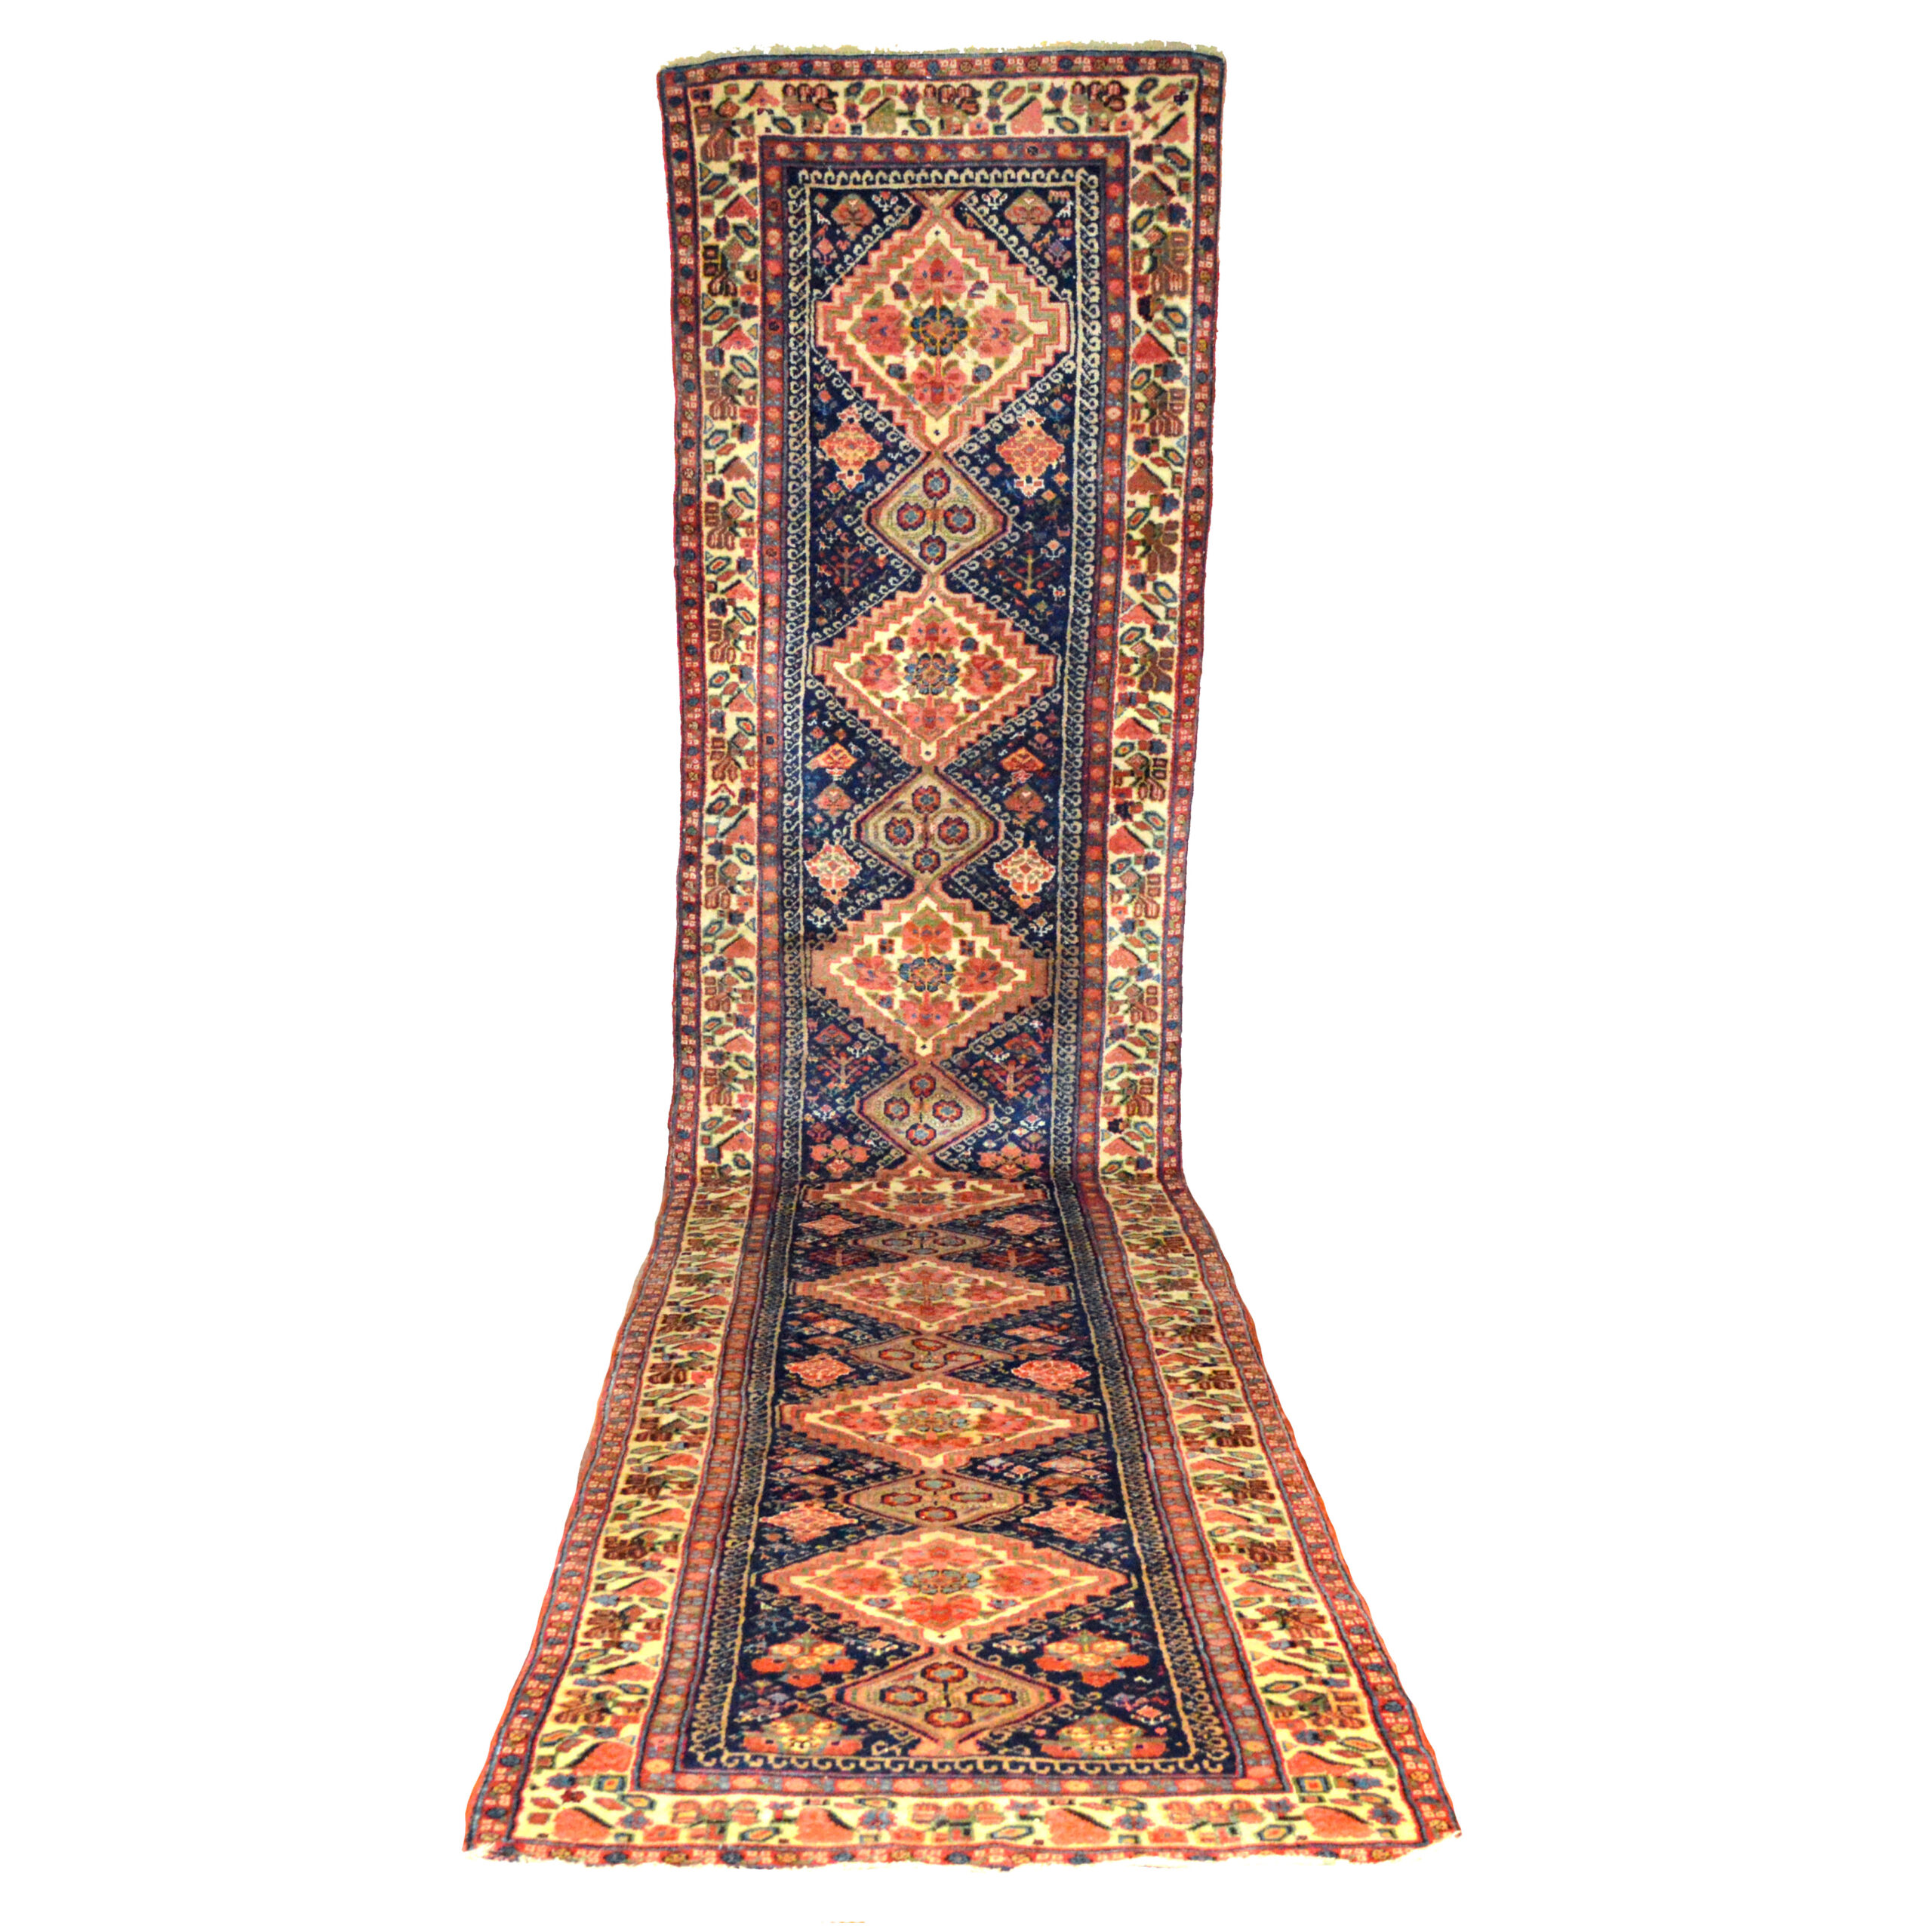 Douglas Stock Gallery is one of America's most selective dealers in antique Oriental rugs, Boston,MA area, South Natick,MA, antique northwest Persian runner with medallions on a navy blue field that is framed by an ivory border